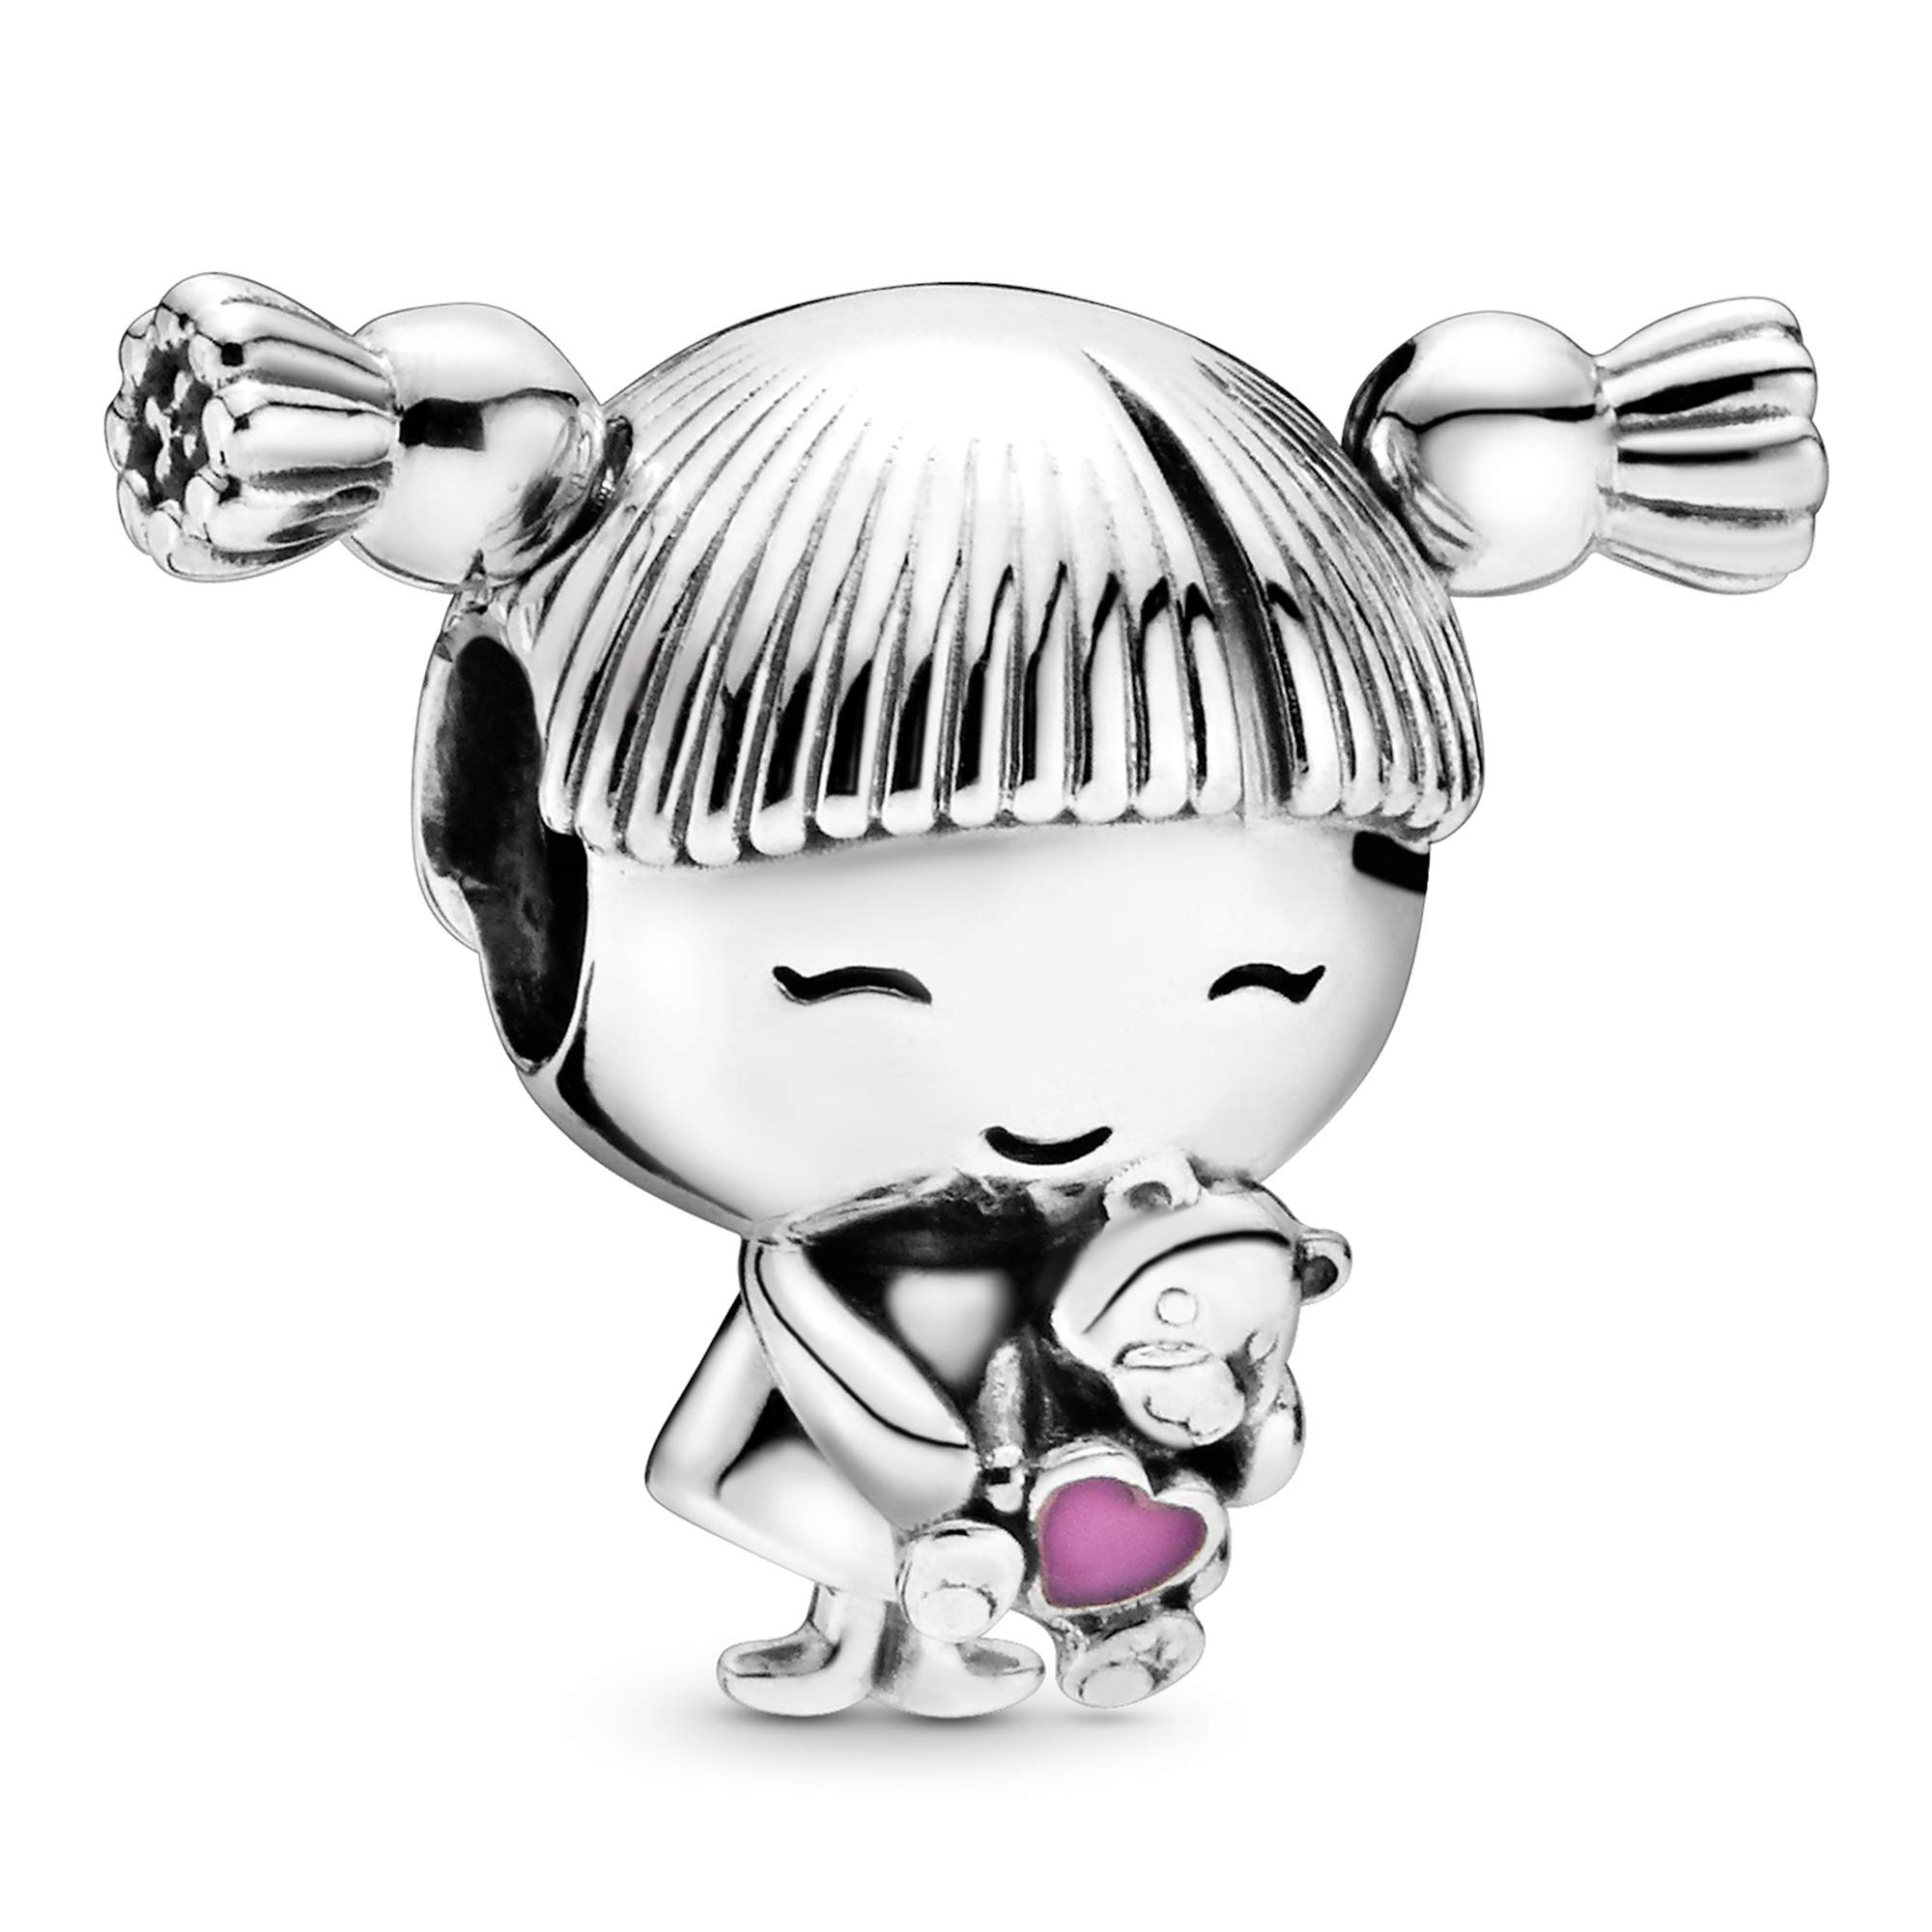 Pandora Little Girl Charm - Compatible Moments Bracelets - Jewelry for Women - Gift for Women in Your Life - Made with Sterling Silver & Enamel, With Gift Box